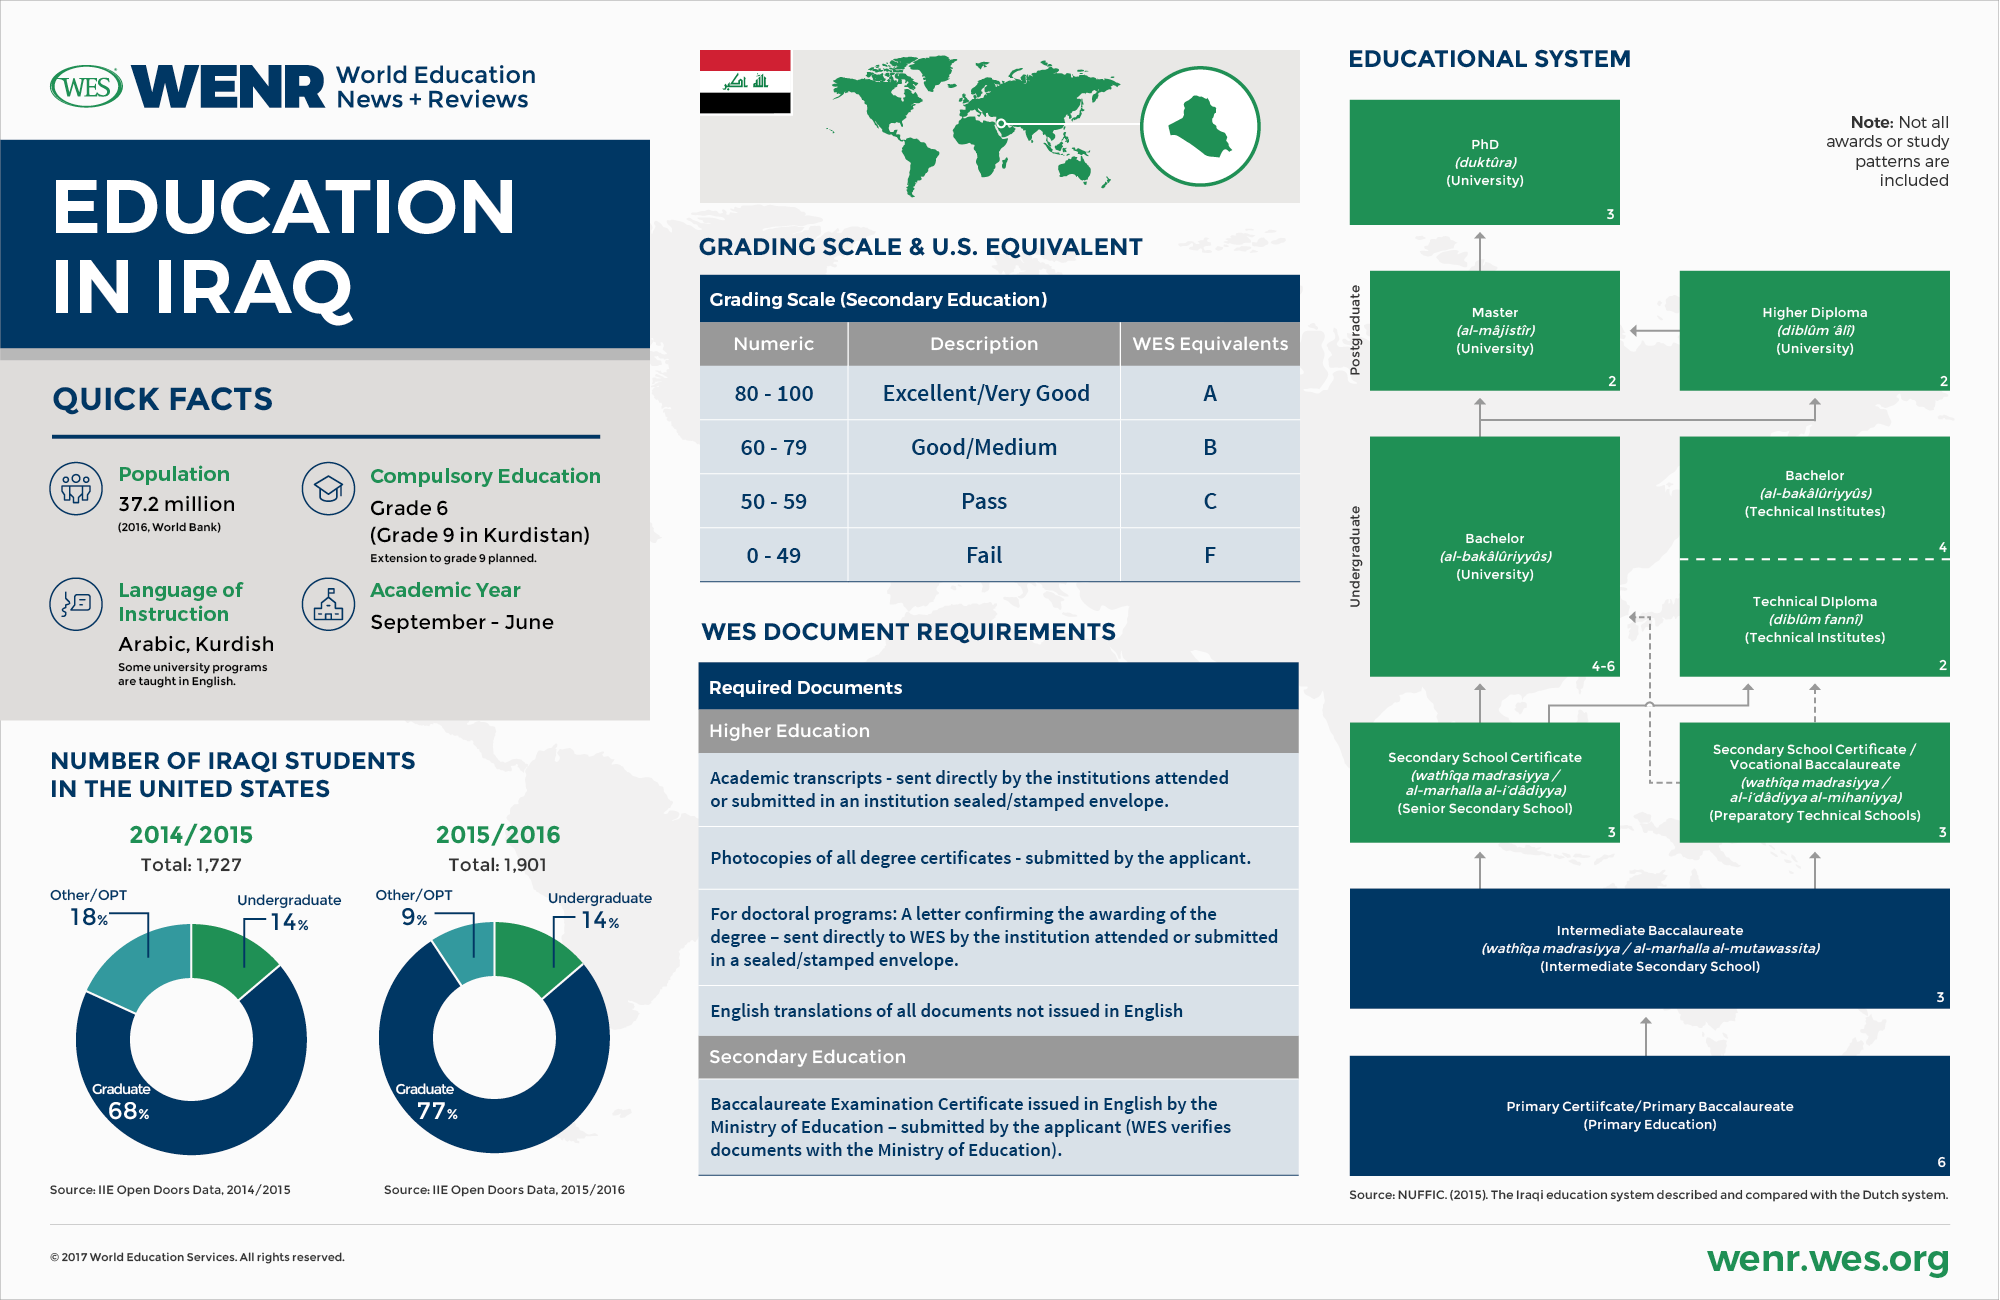 An infographic with fast facts about Iraq's educational system and international student mobility landscape. 